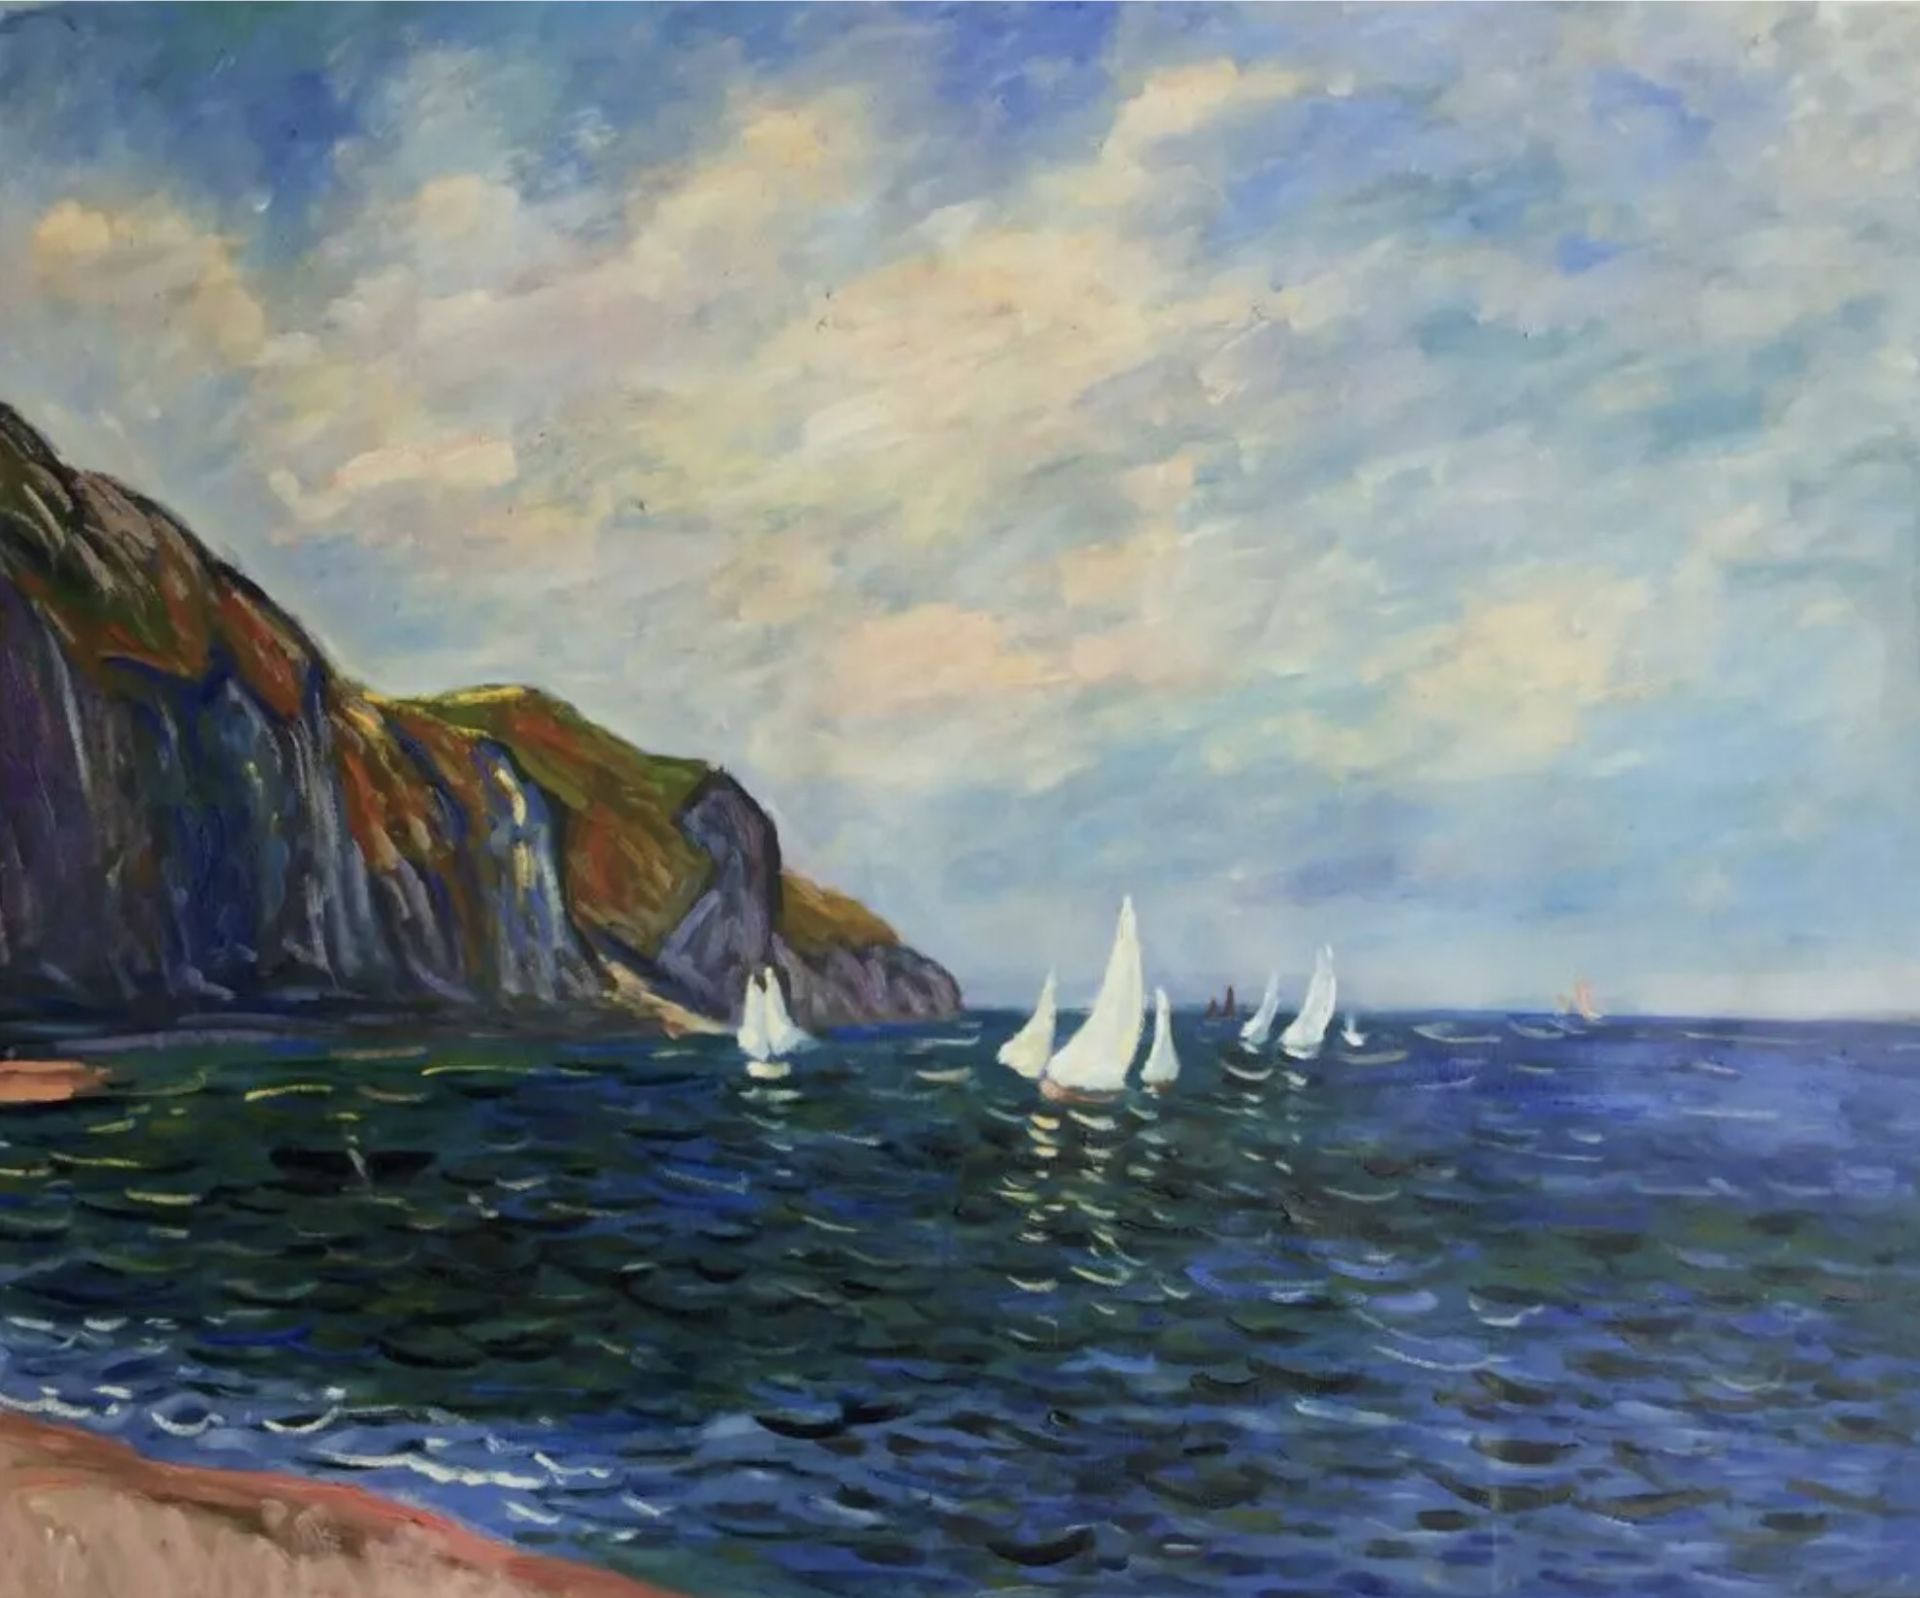 Claude Monet "Cliffs and Sailboats at Pourville, 1882" Oil Painting, After